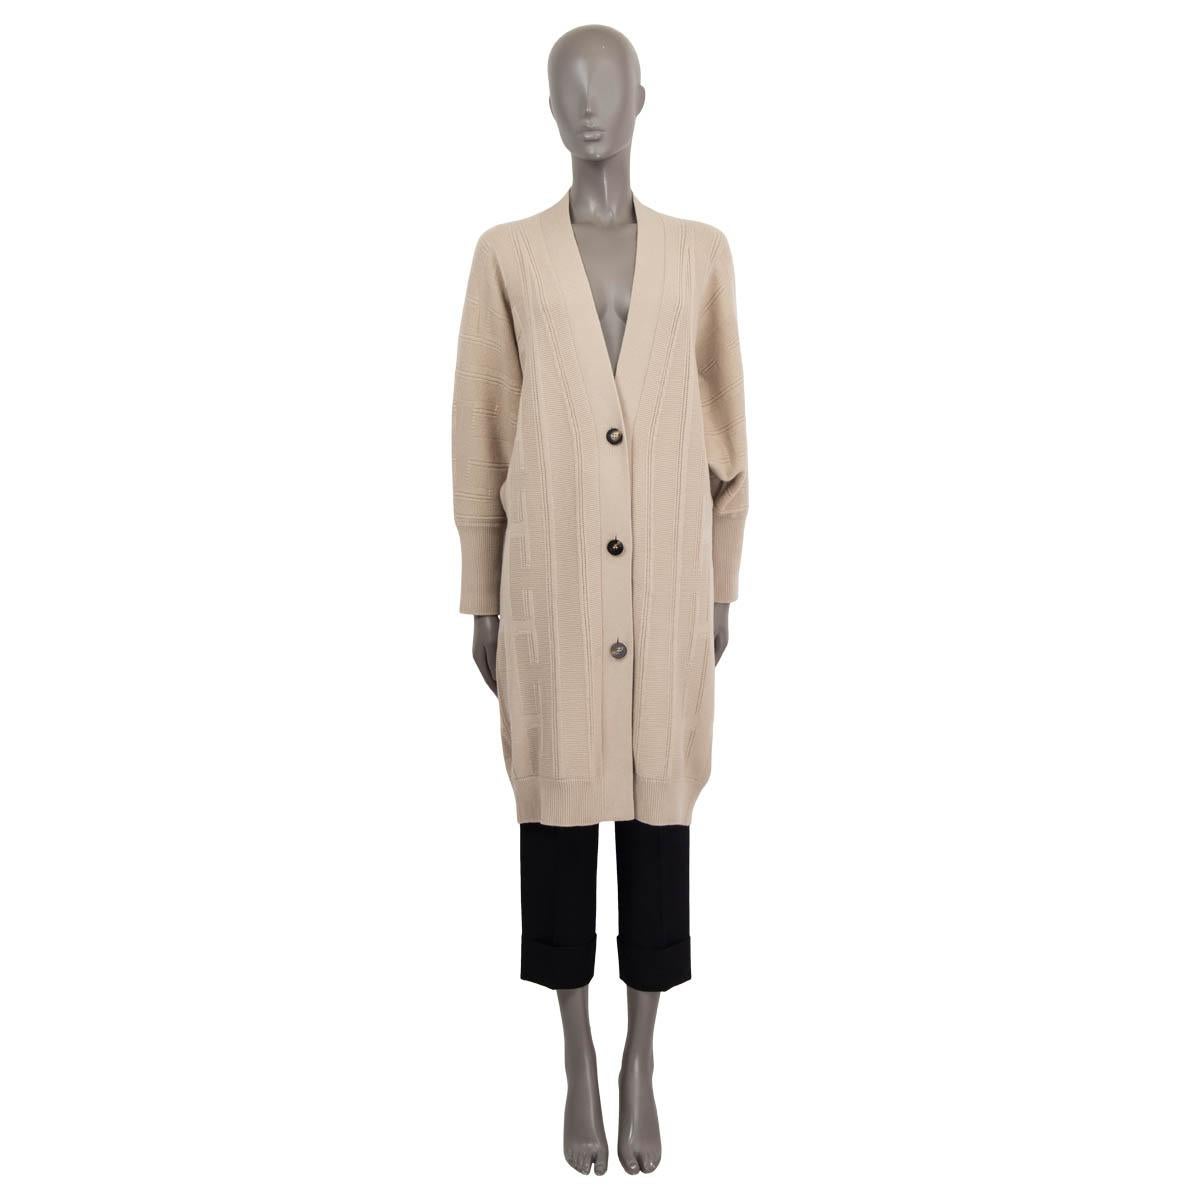 100% authentic Hermès Pre-Fall 2020 voyage long oversized knit coat in sand wool (100%). Features long raglan sleeves (sleeve measurements taken from the neck) and a deep v-neck. Opens with three buttons at the front. Unlined. Has been worn once and